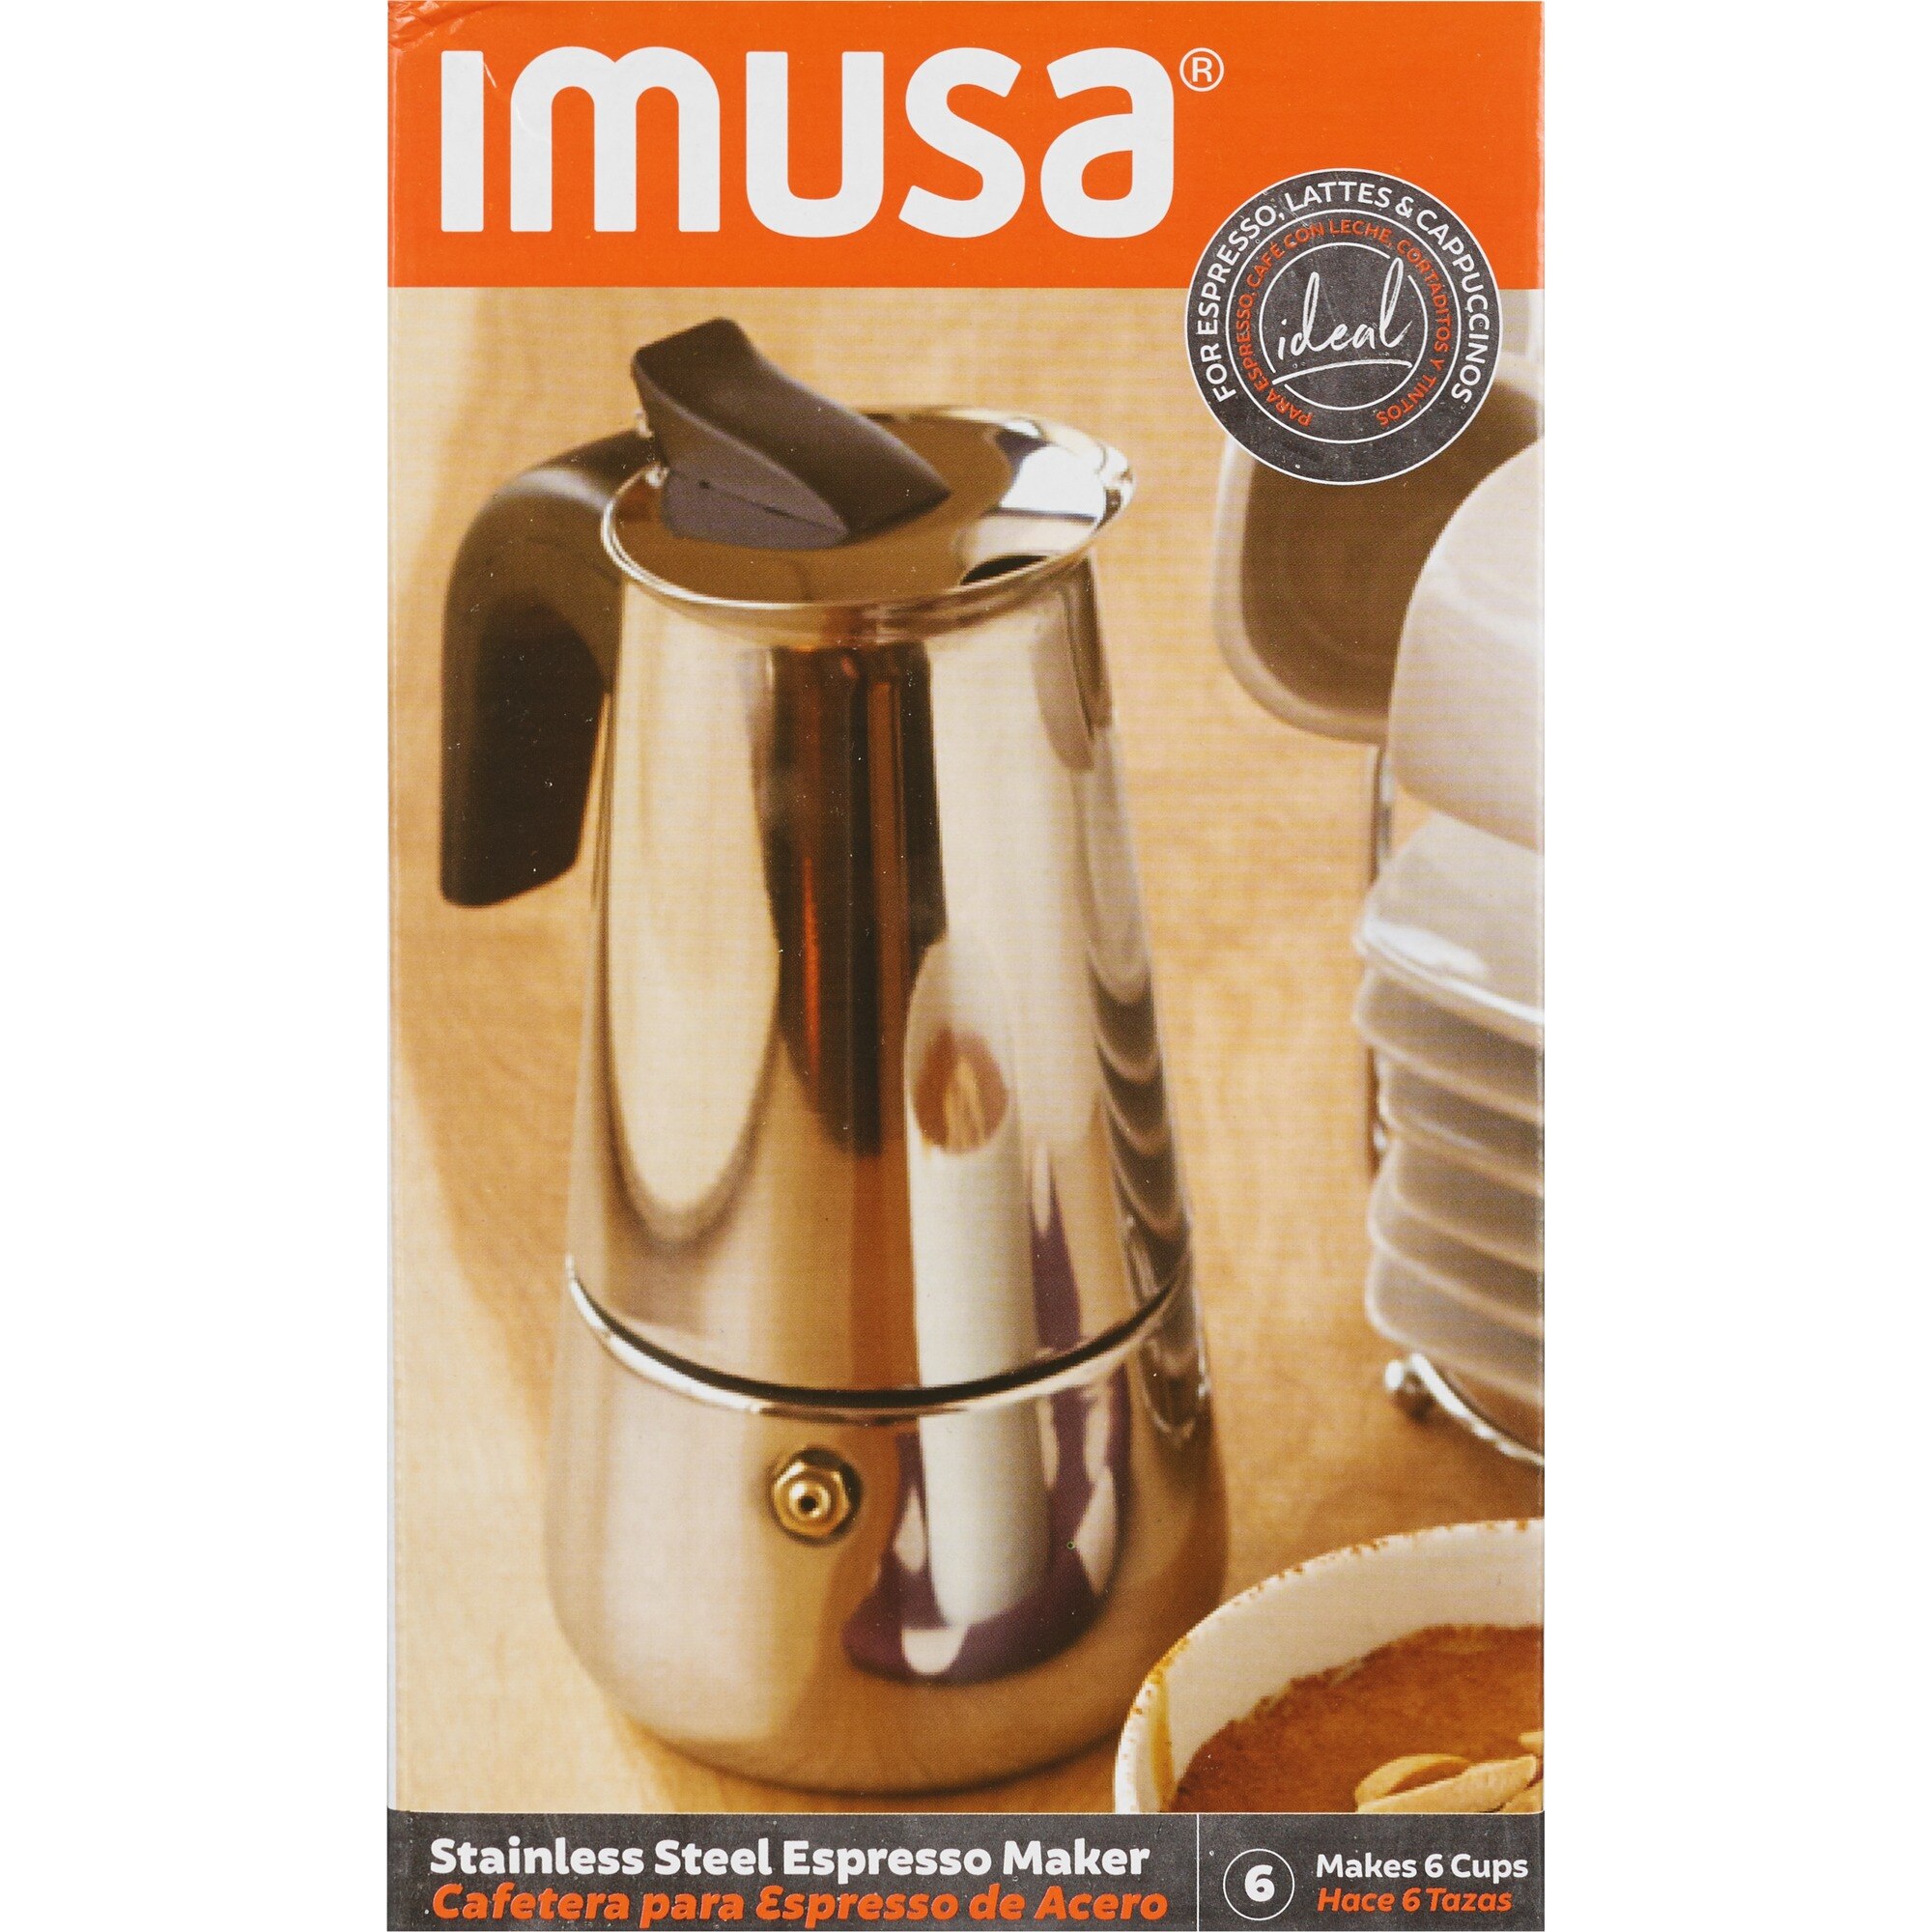 IMUSA Stovetop Coffeemaker, Stainless Steel, 6 CUP